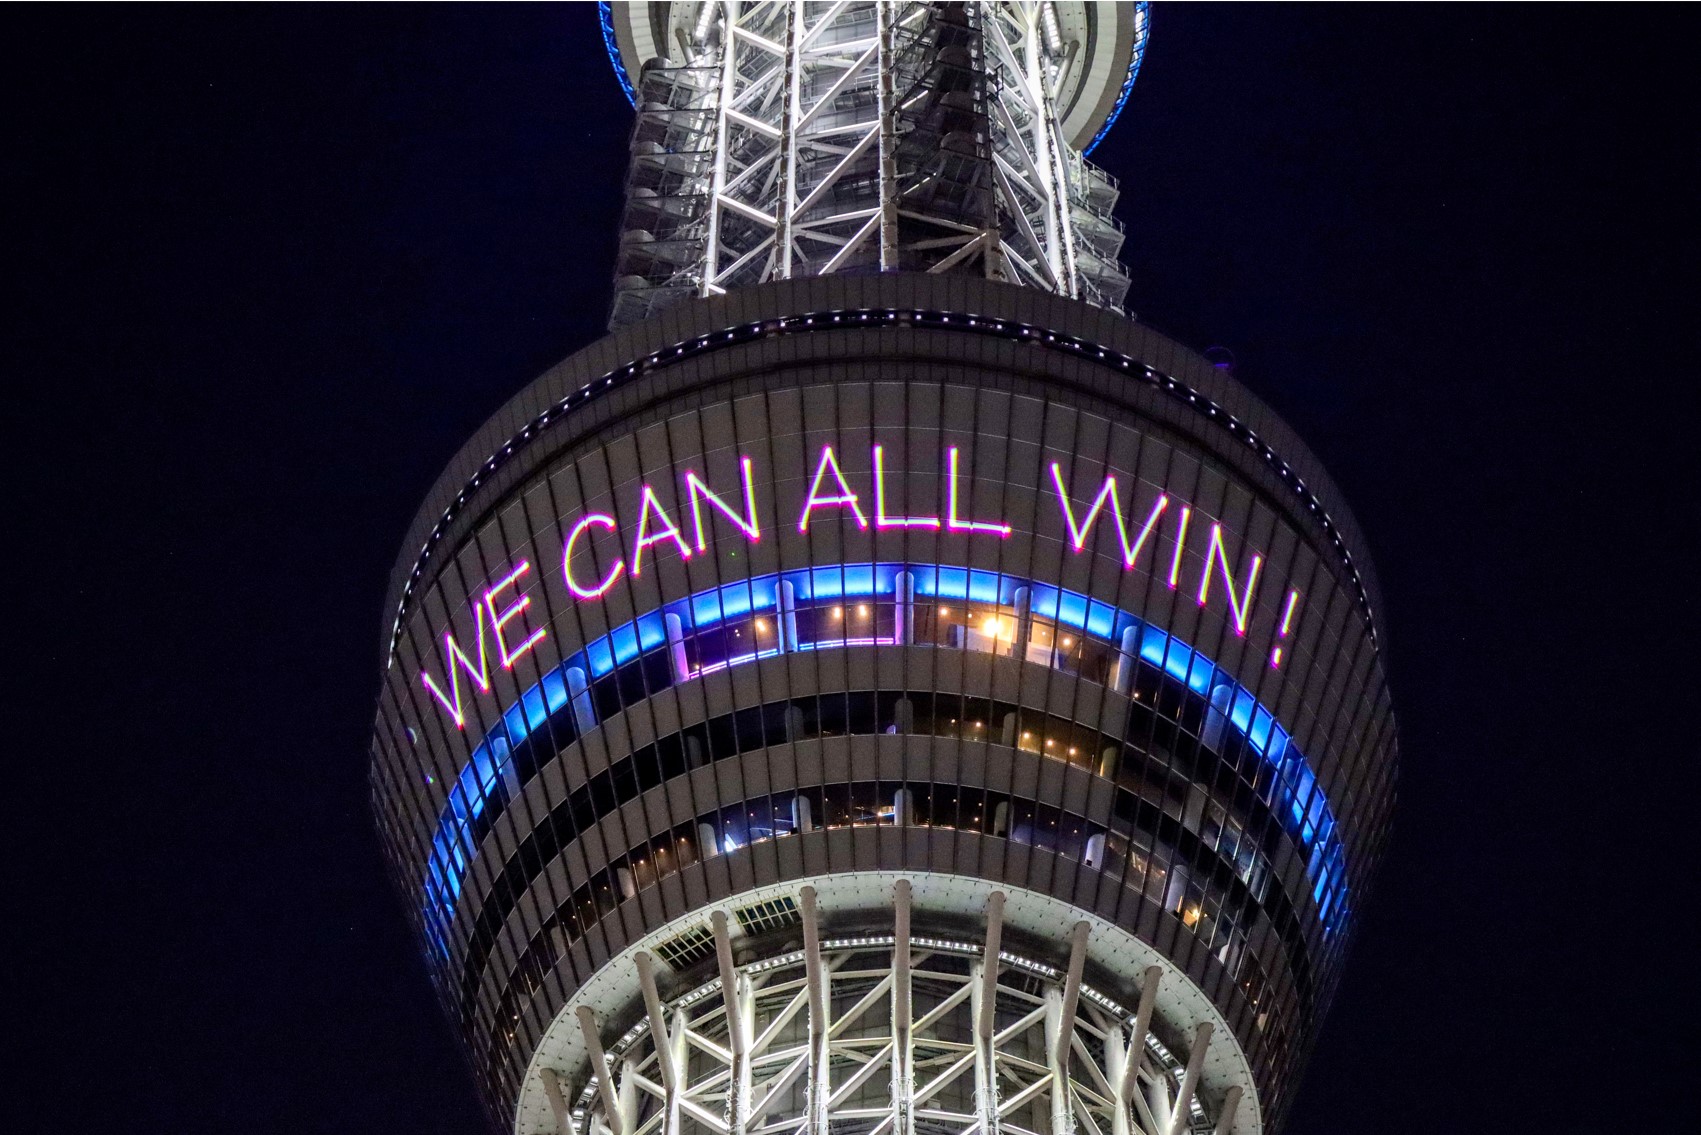 We Can All Win 2020 (c. TOKYO SKYTREE)